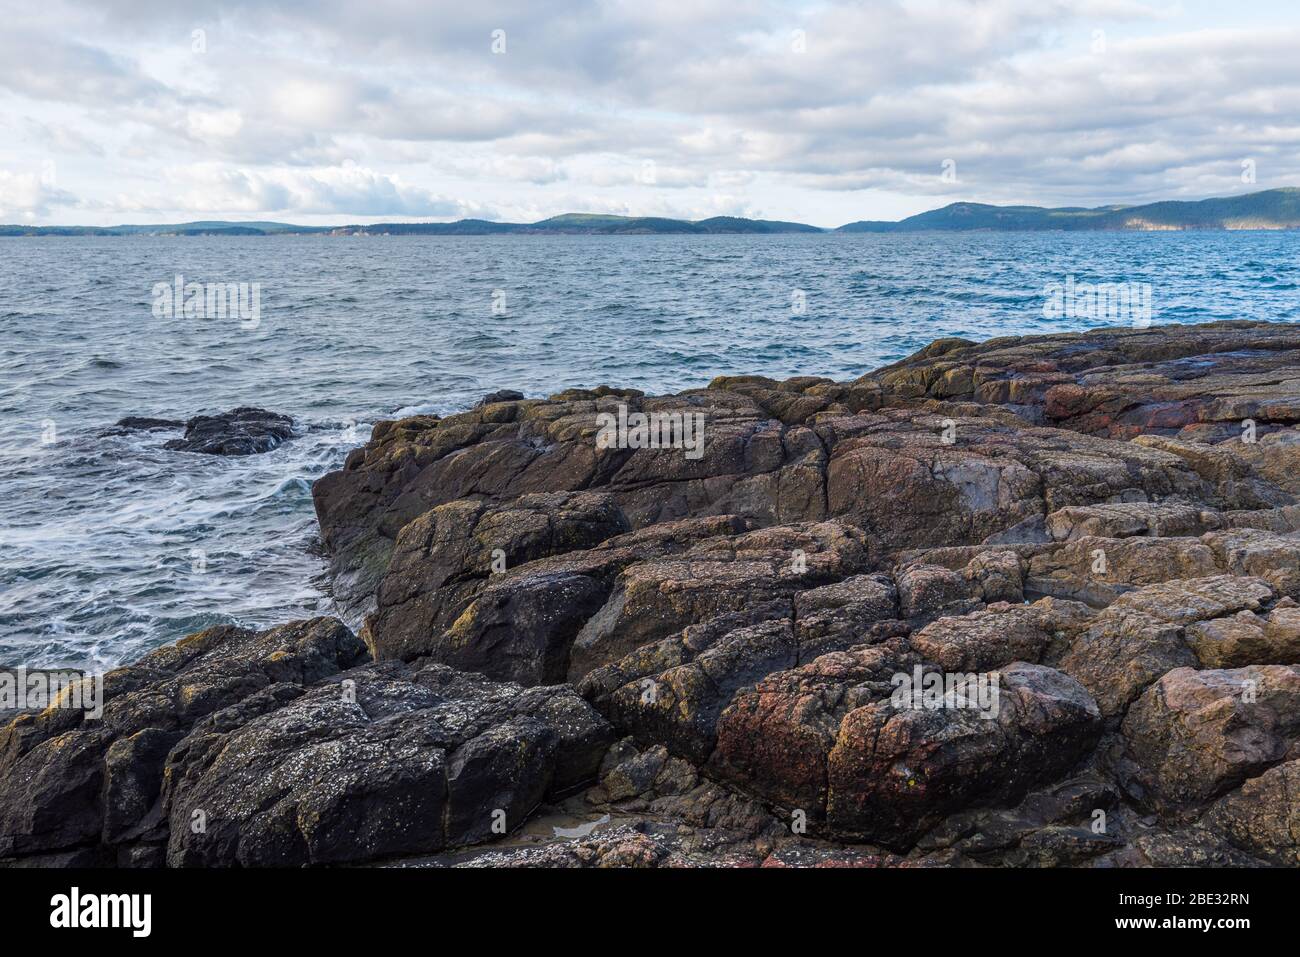 Landscape of horizontal rock formations and the Pacific Ocean at Washington Park in Anacortes, Washington Stock Photo